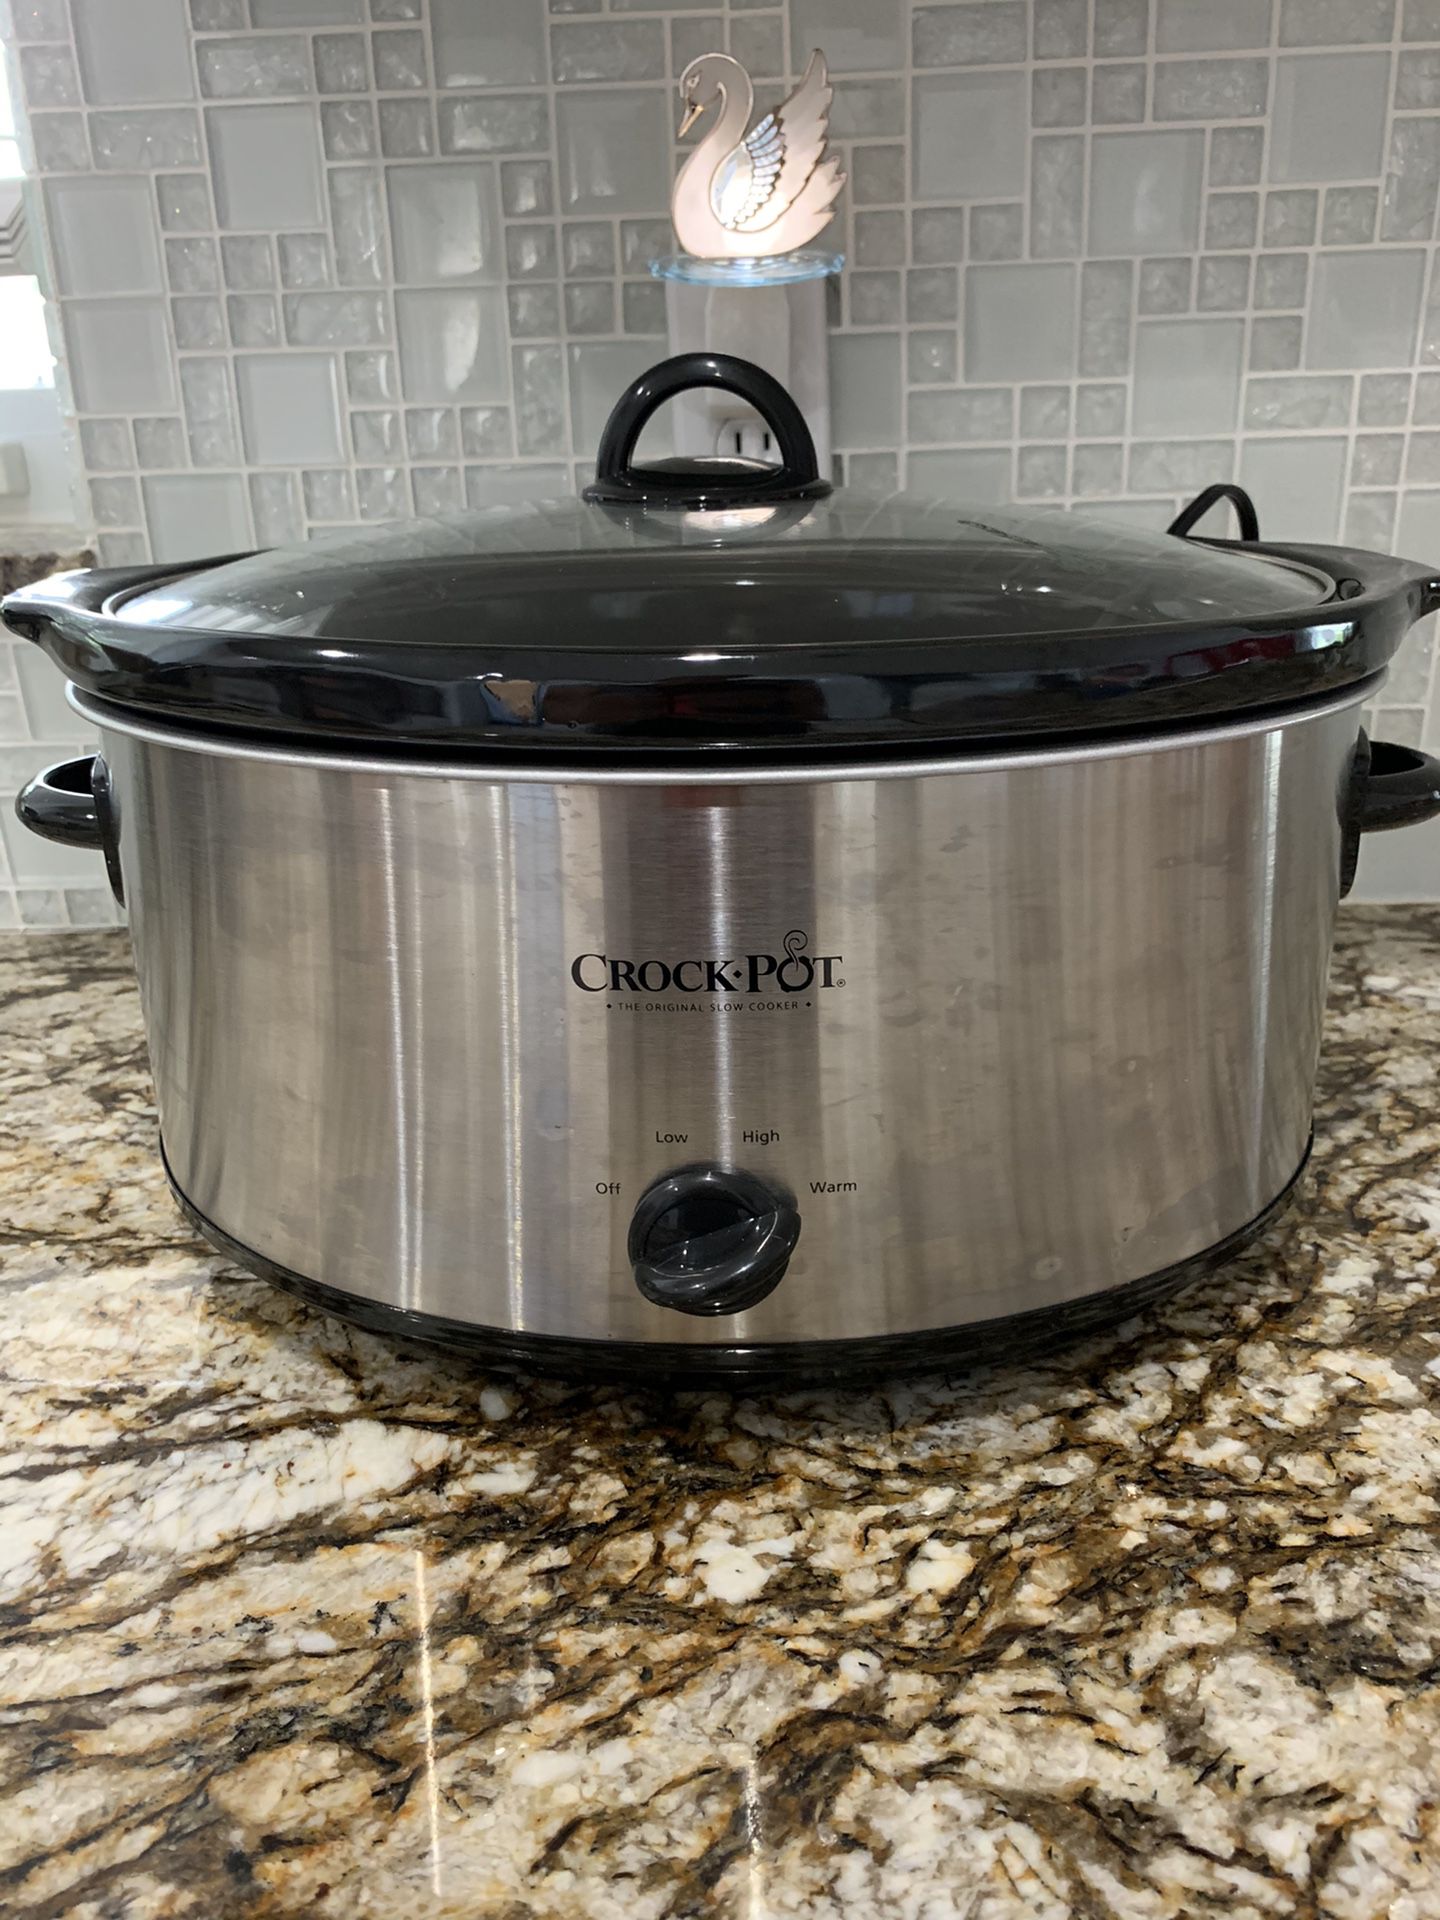 8 qt crock pot barely used. MUST GO!